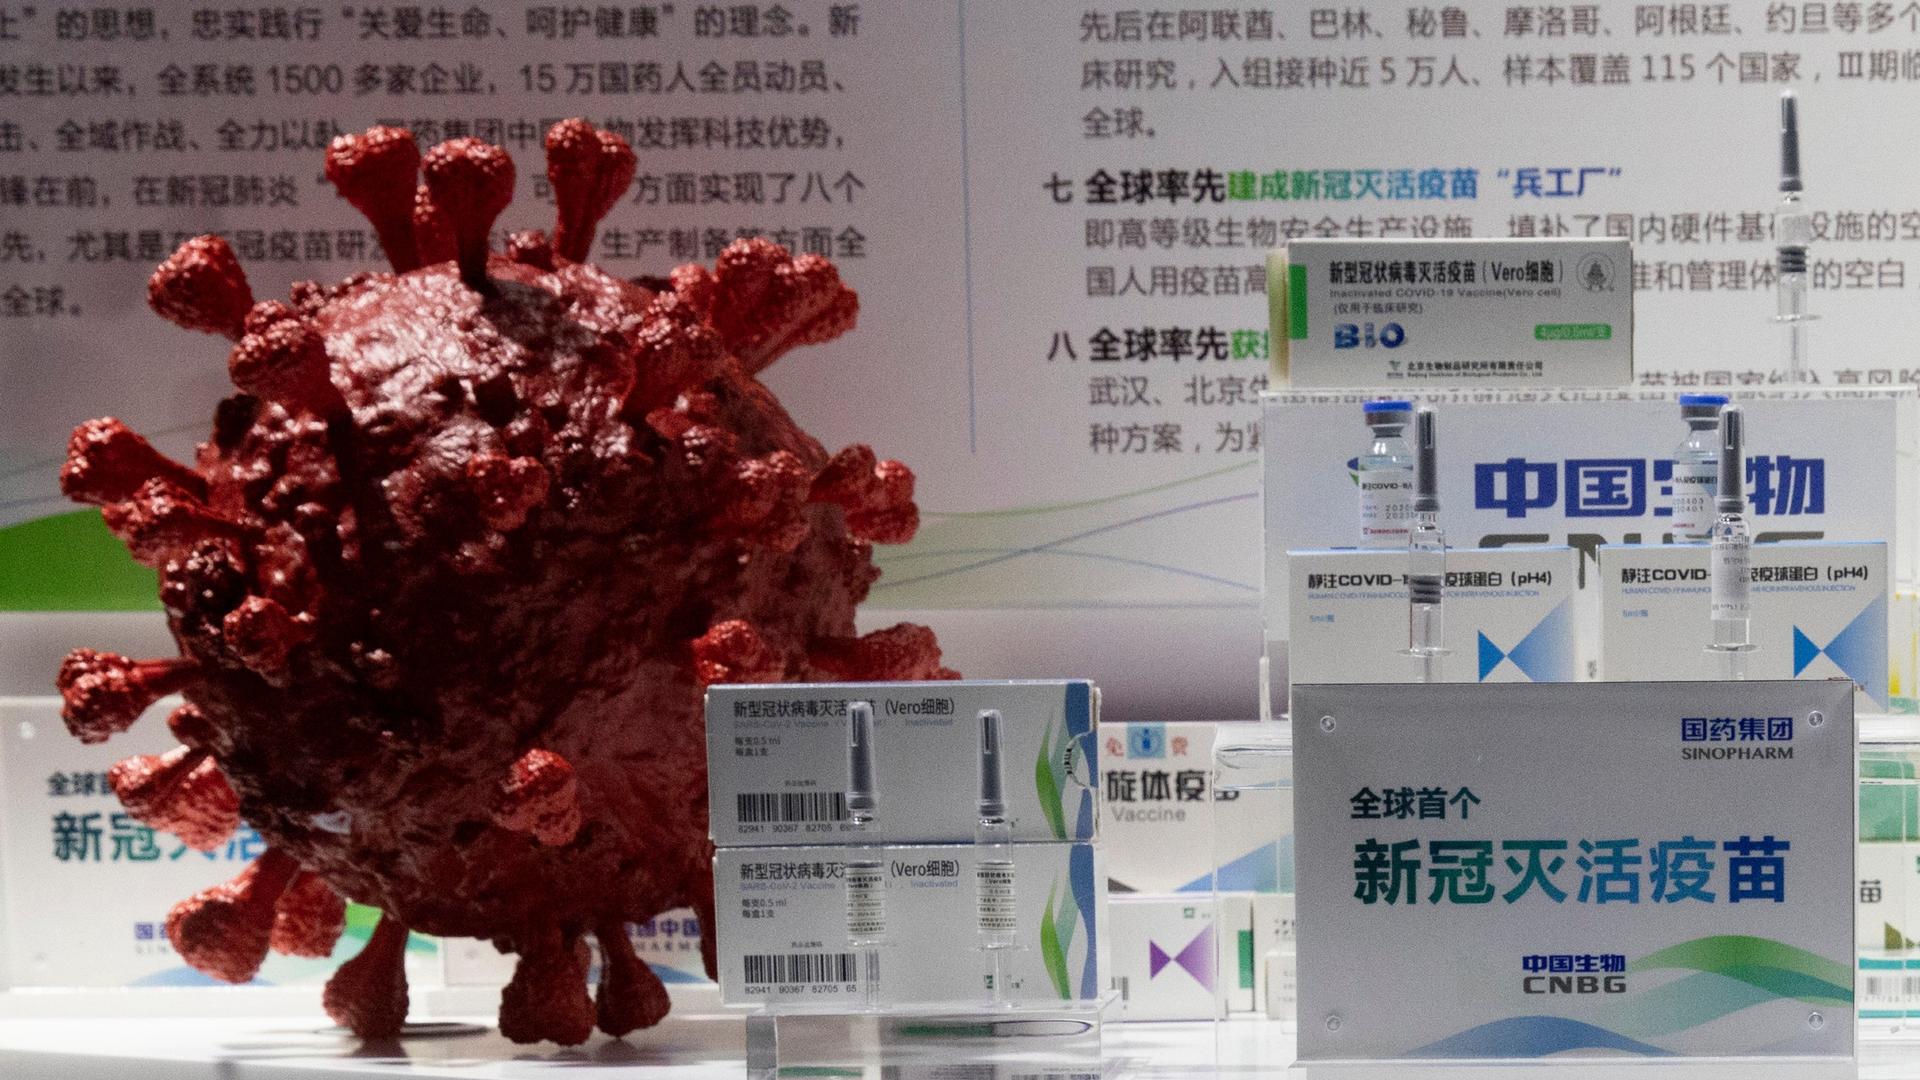 Samples of a COVID-19 vaccine produced by Sinopharm subsidiary CNBG are displayed near a 3D model of a coronavirus during a trade fair in Beijing on Sept. 6, 2020.